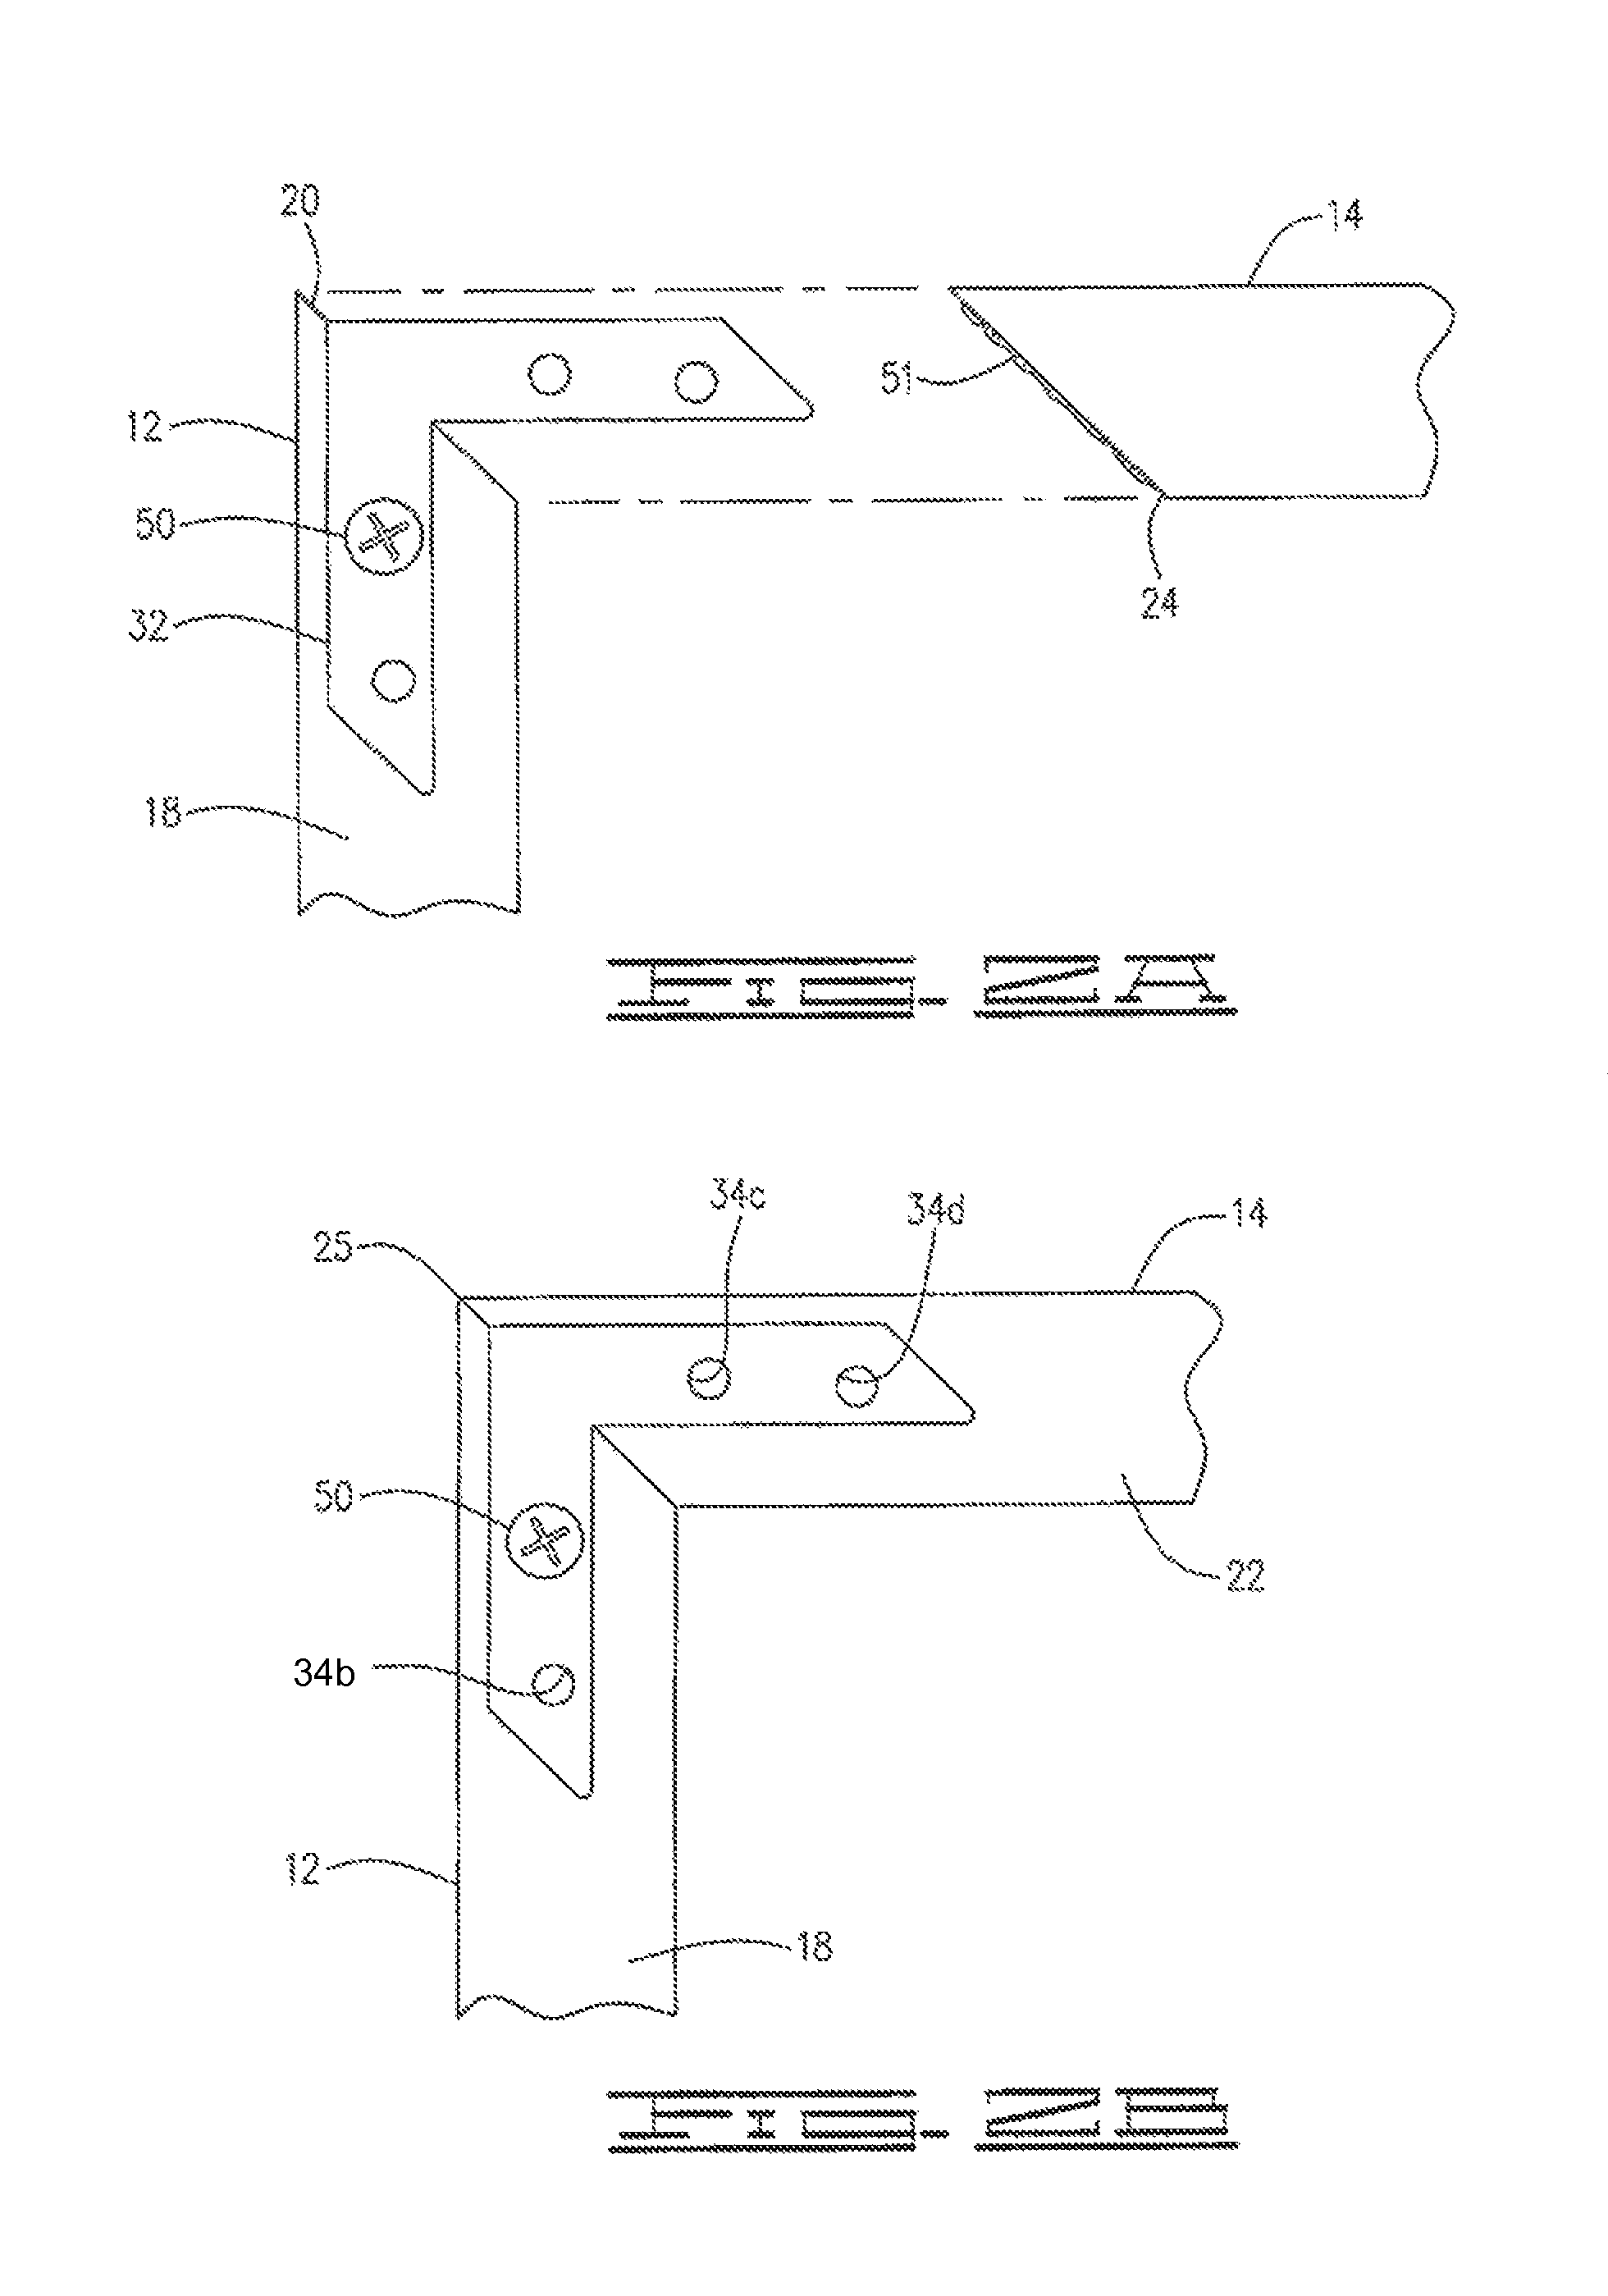 Apparatus and method for clamping mitered corners